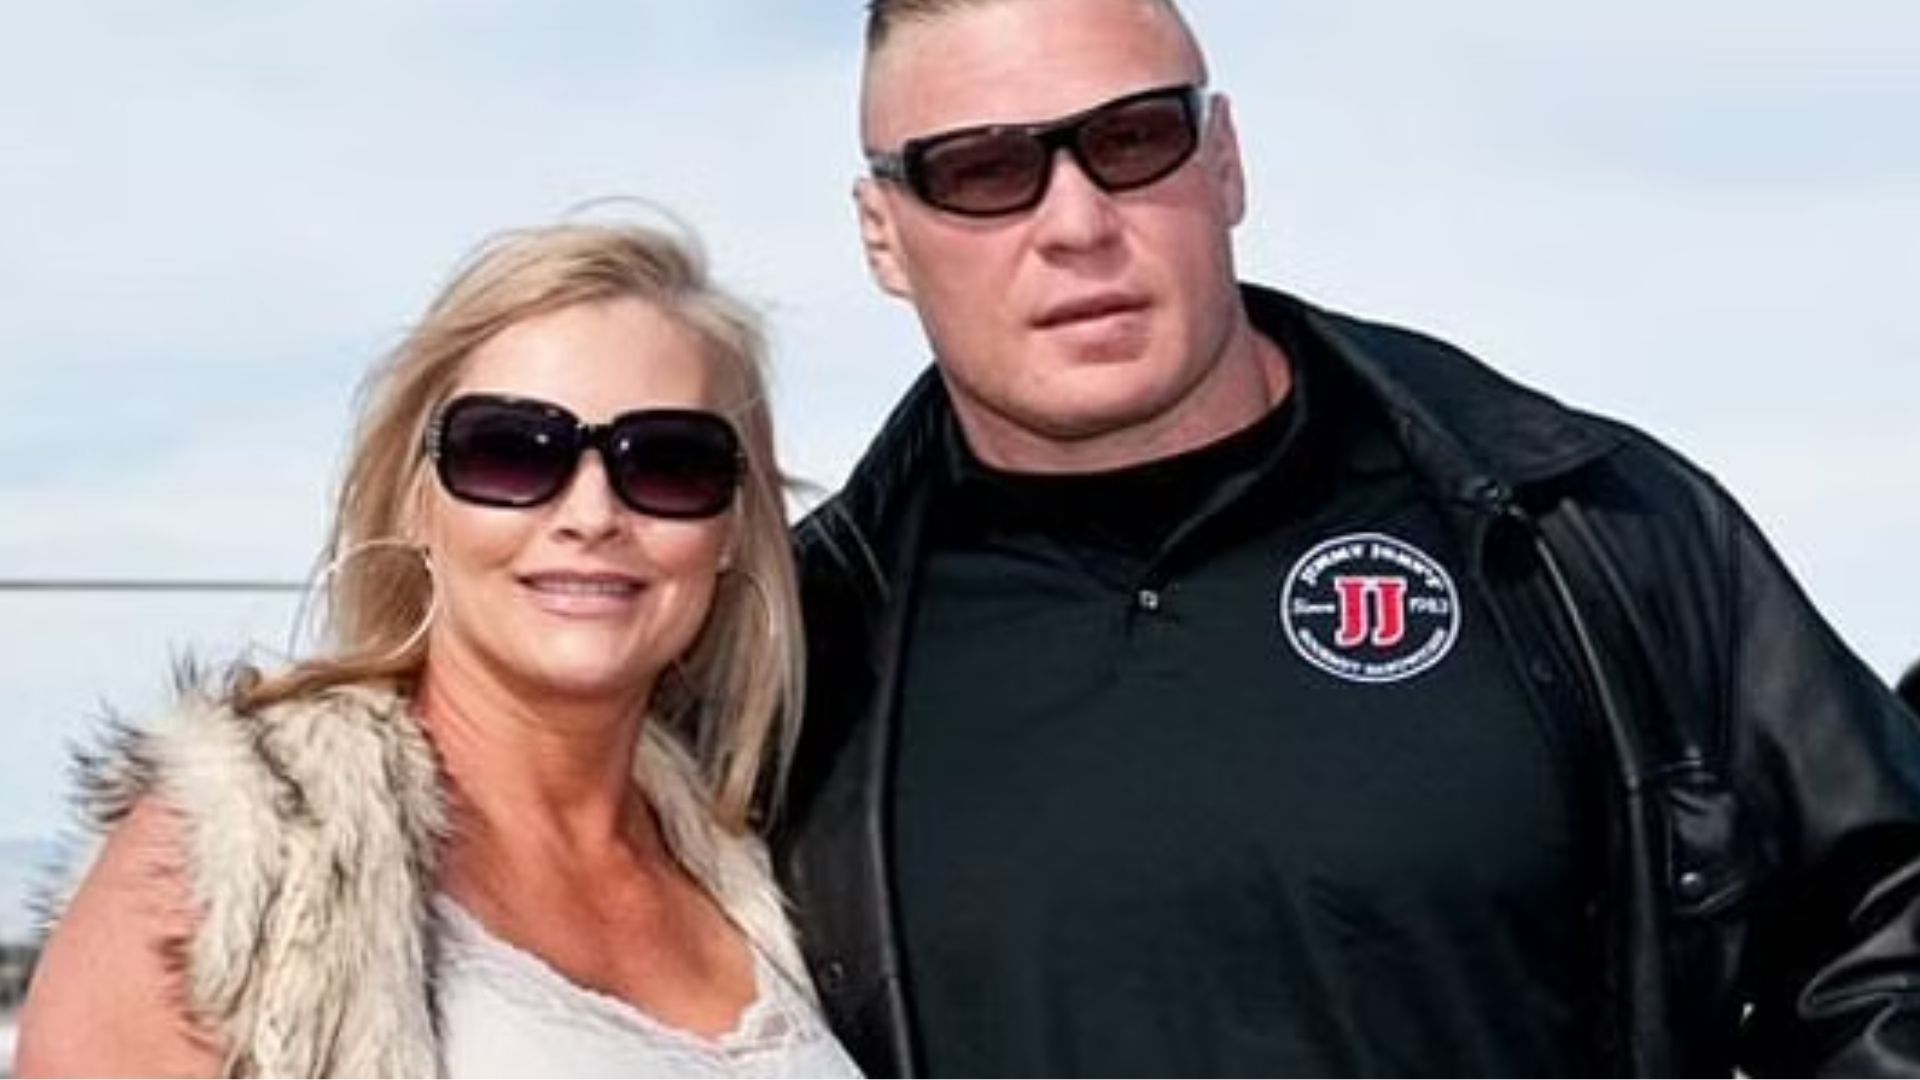 Brock Lesnar and his wife Sable